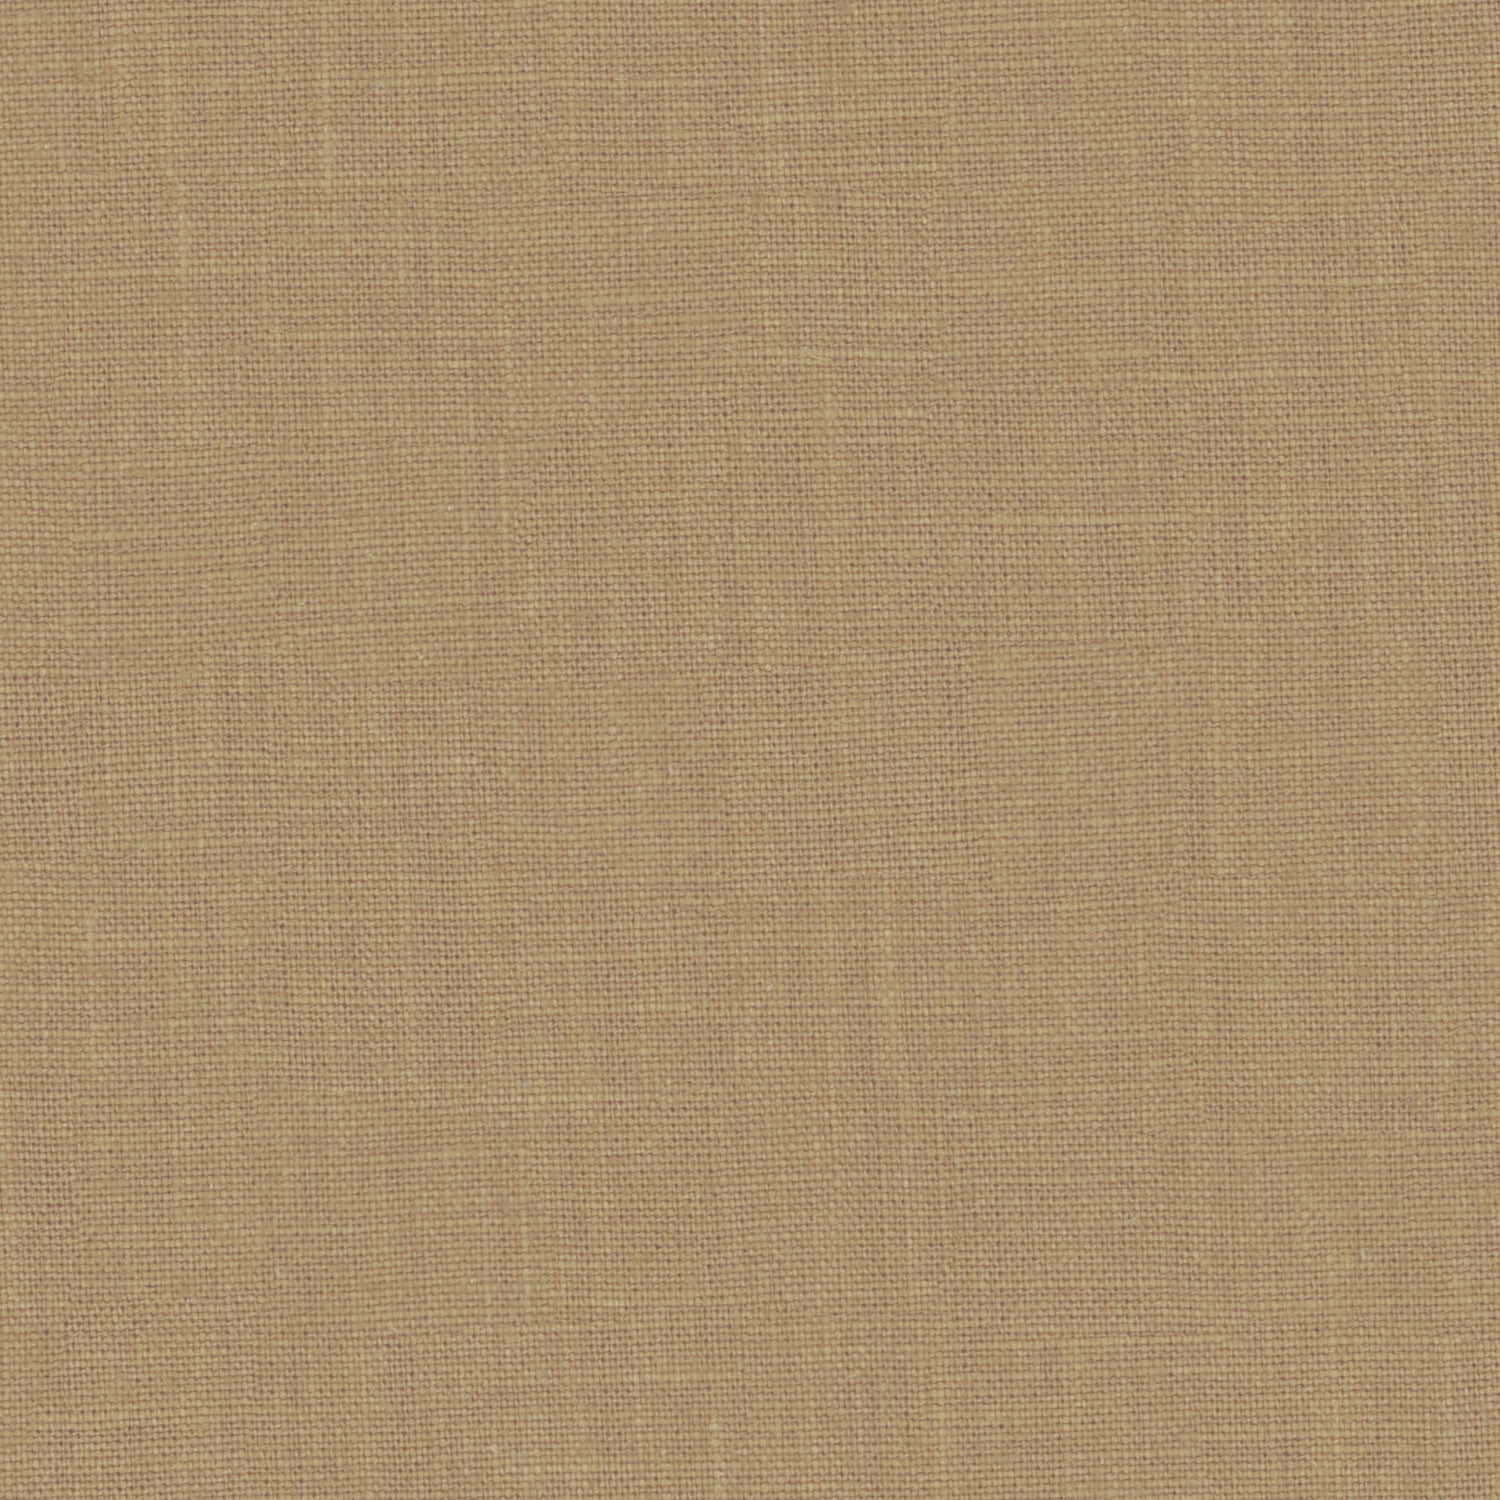 CAMPBELL Biscuit Woven Fabric - Warner House